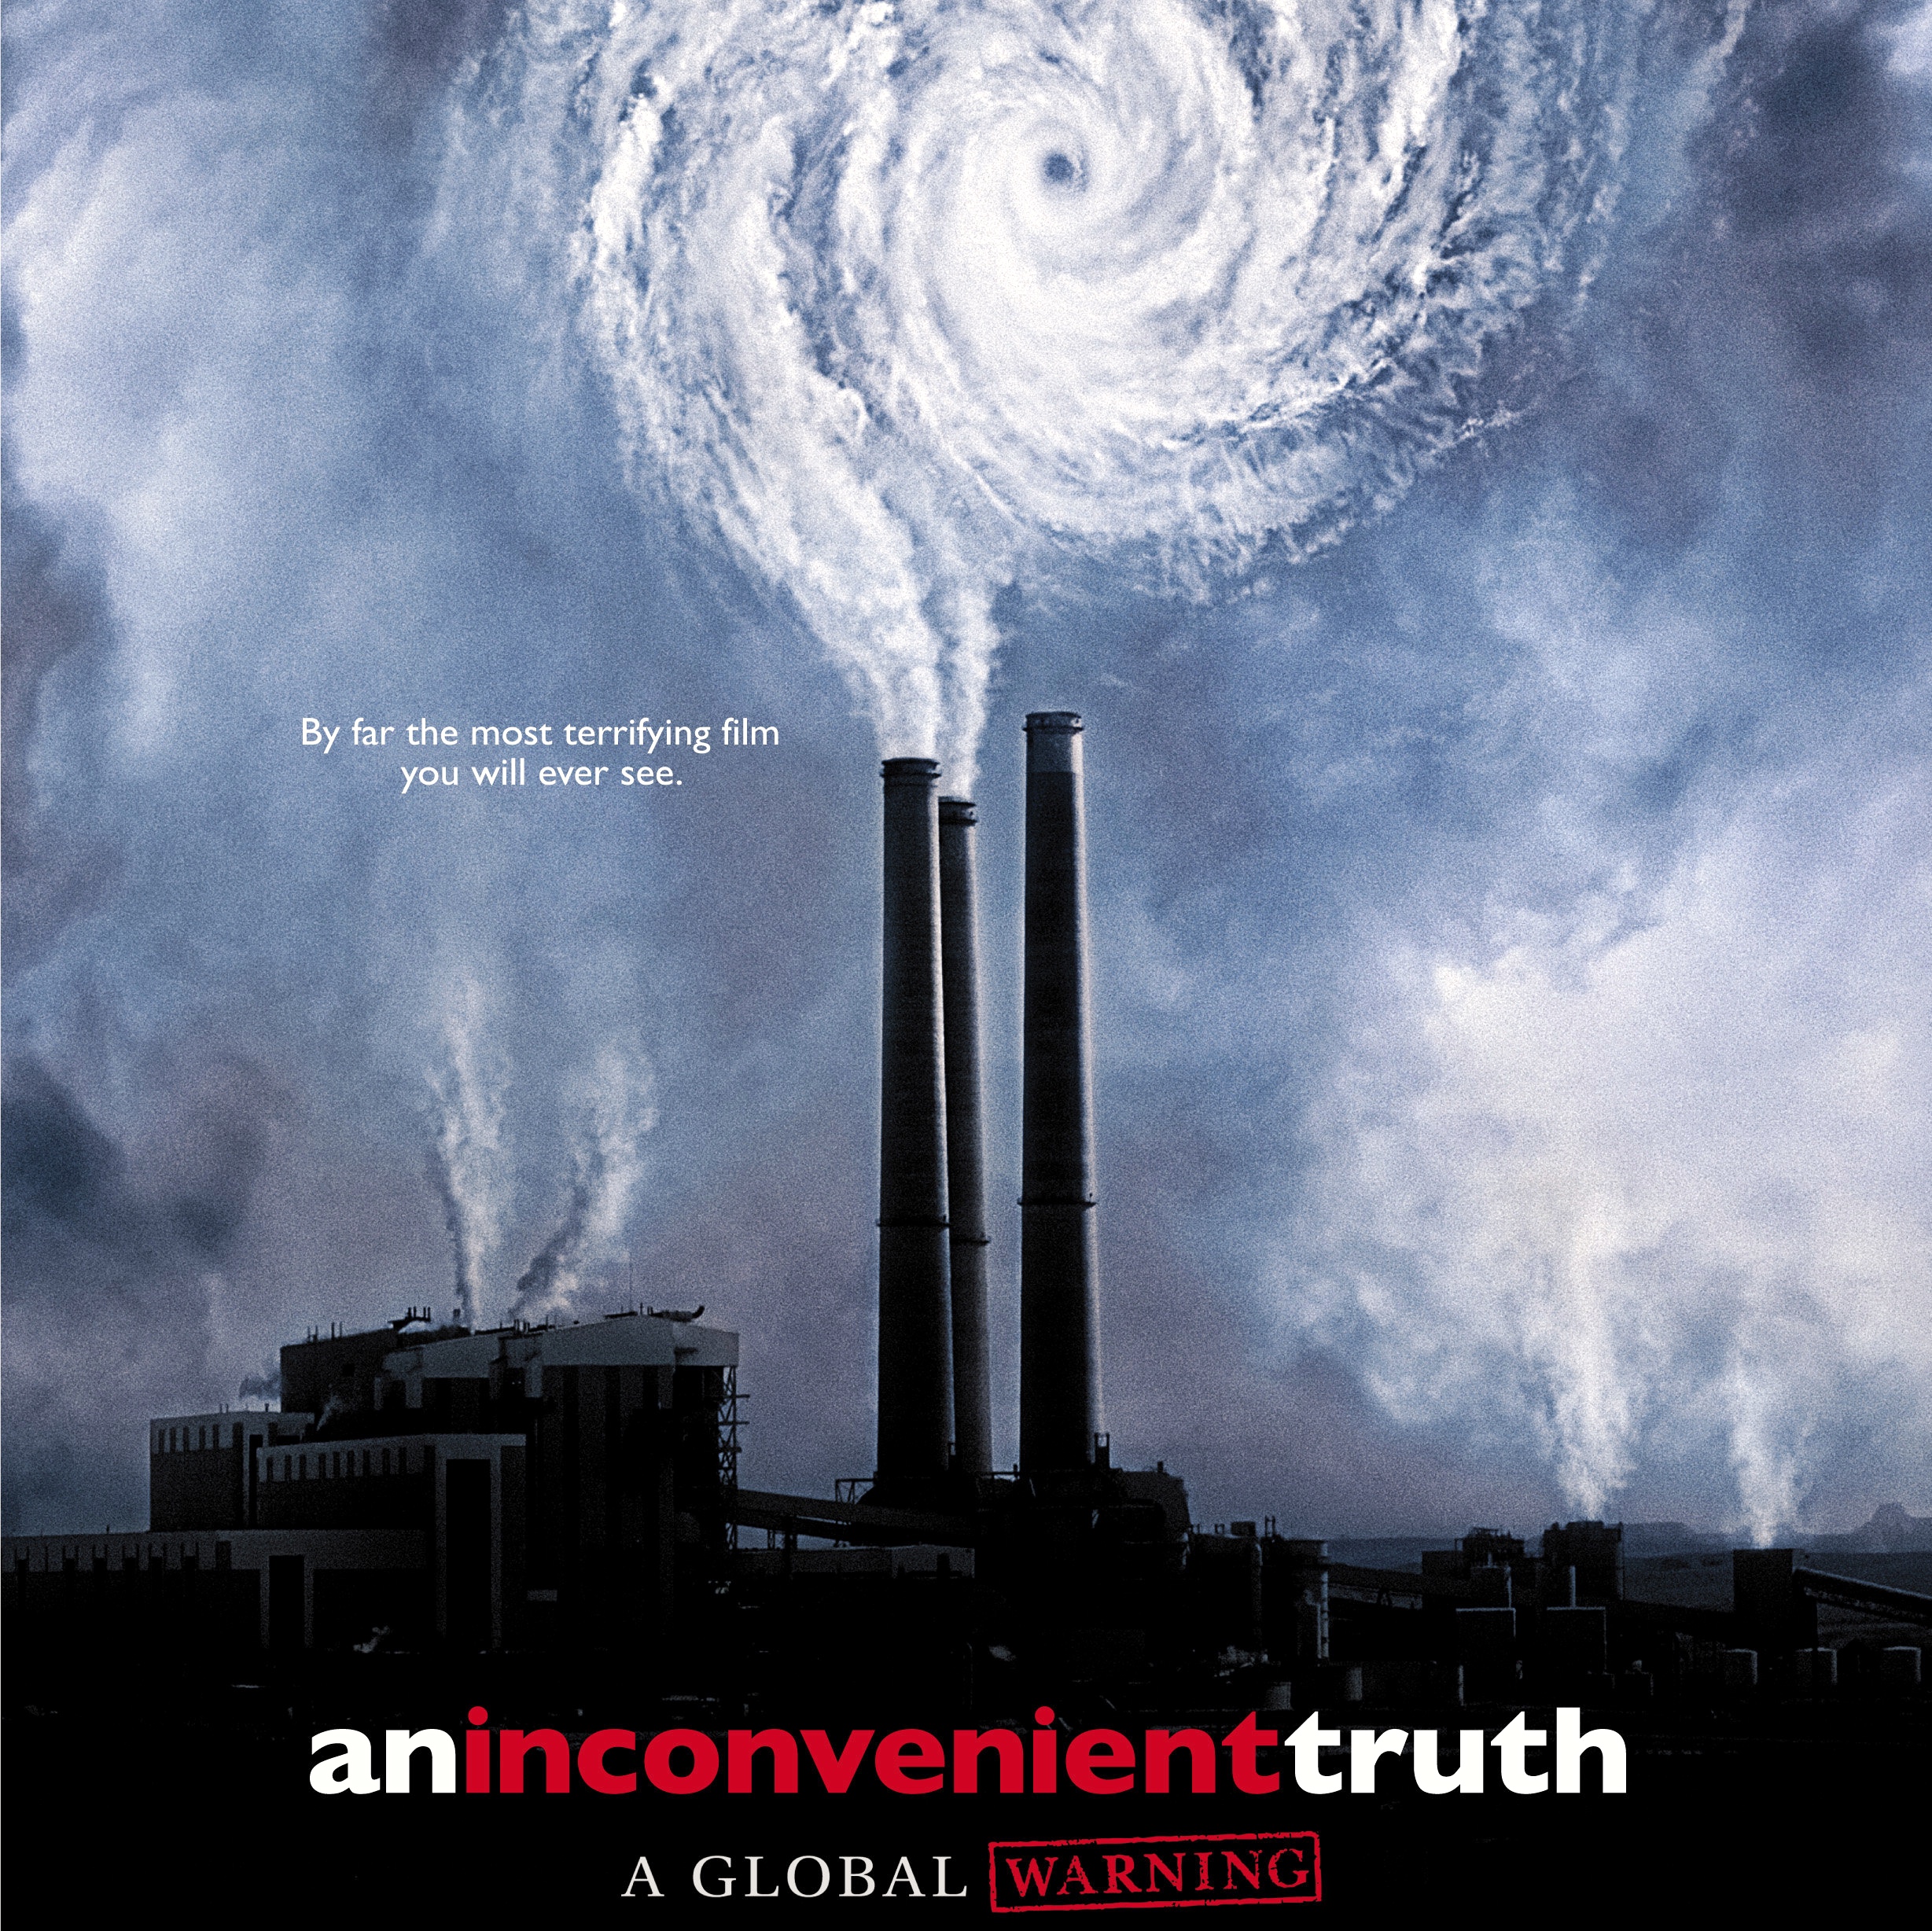 Inconvenient Truth (2006) poster from EcoJungle Instagram